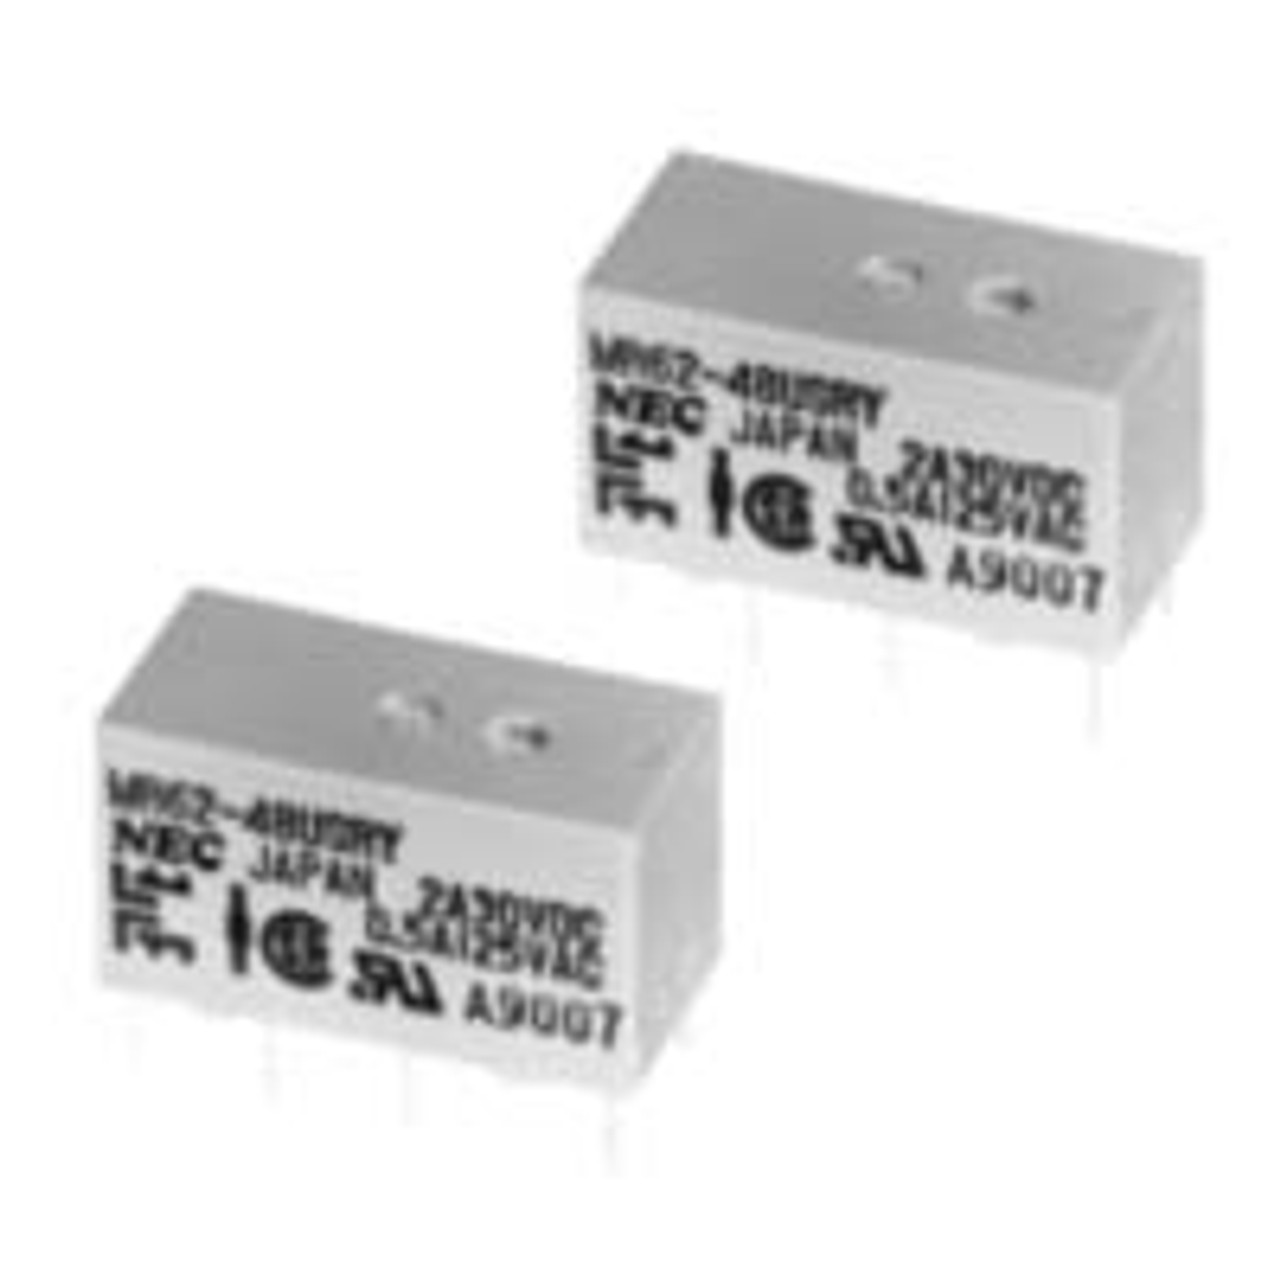 NEC / World Products MR62-24-US-RY Signal Relays